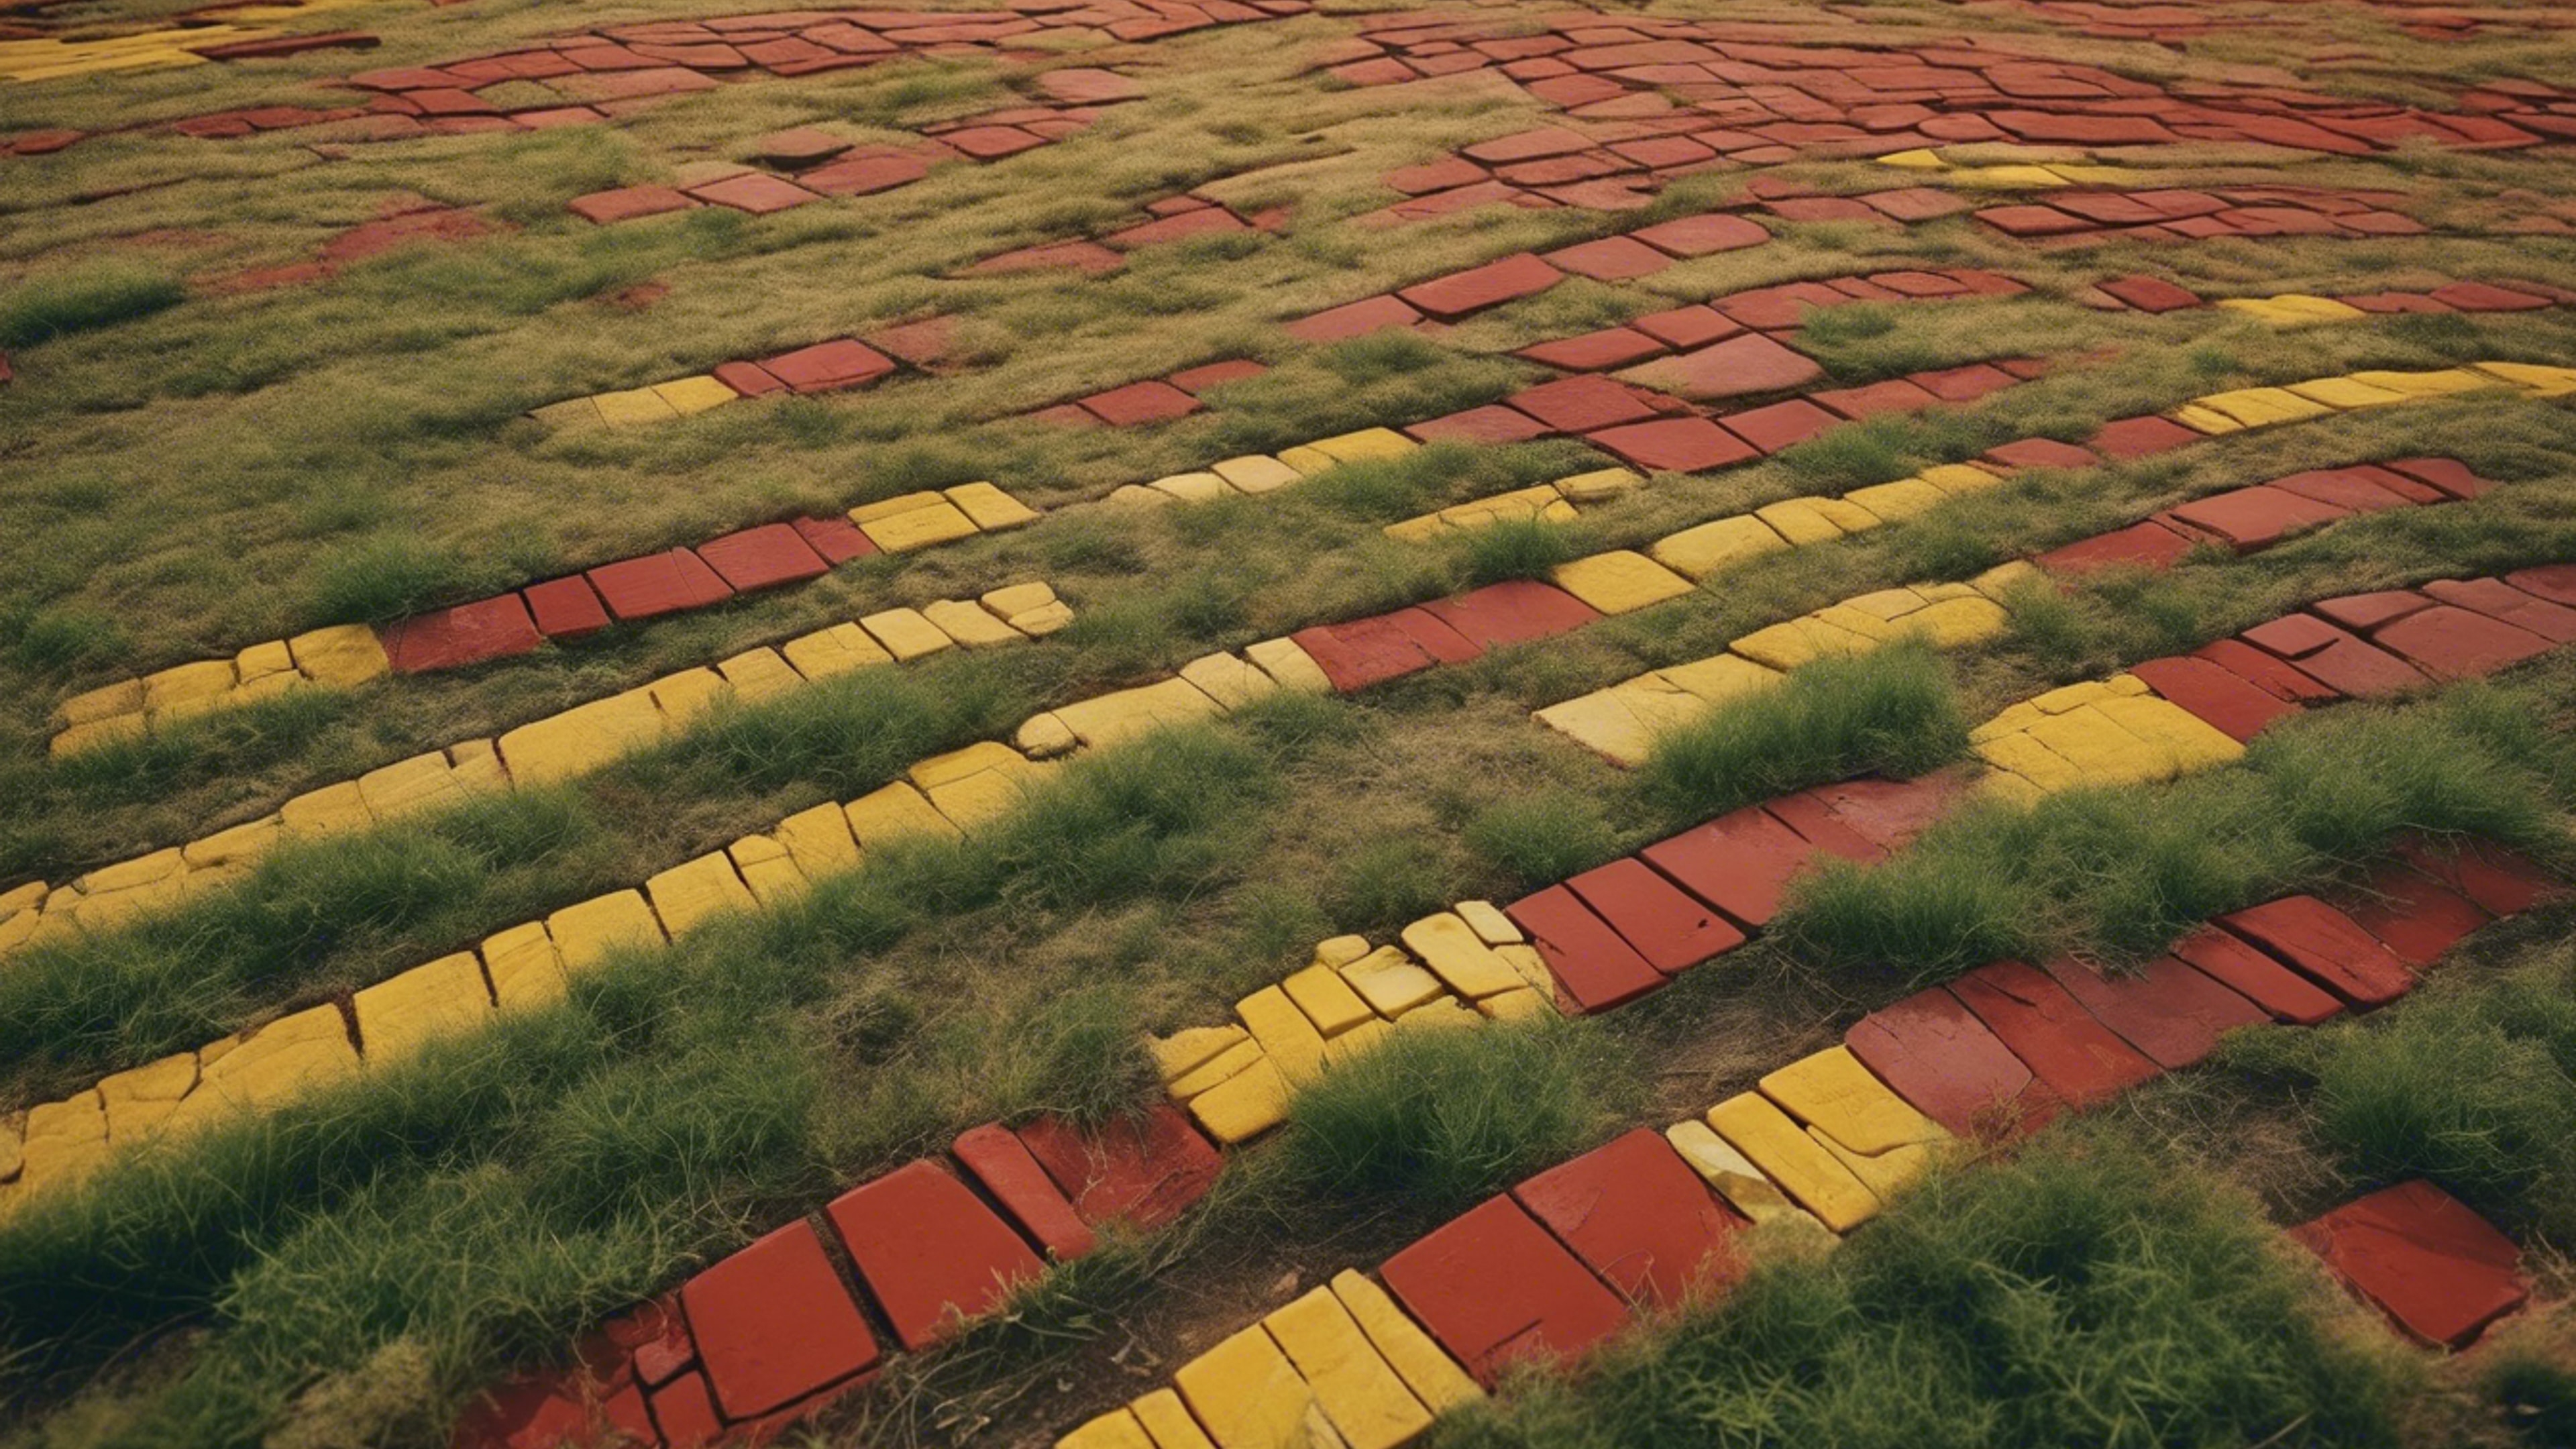 A bird's eye view of a red and yellow brick road weaving through a meadow. Ταπετσαρία[b665fbc055ed4704af98]